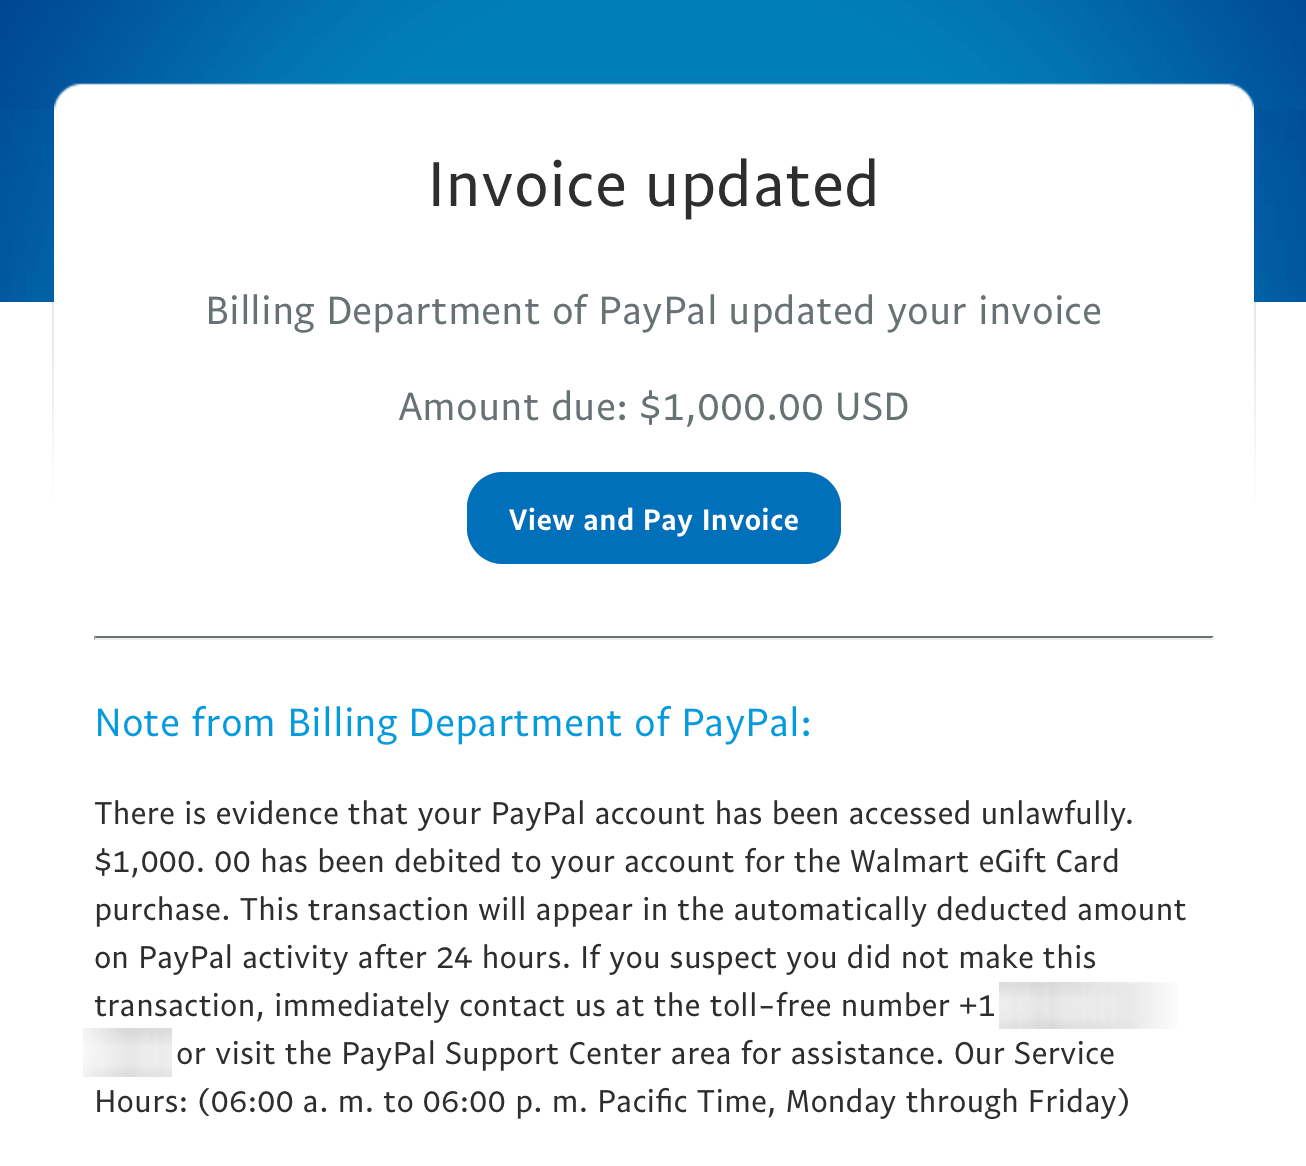 Email that reads, "There is evidence that your PayPal account has been accessed unlawfully. $1,000. 00 has been debited to your account for the Walmart eGift Card purchase. This transaction will appear in the automatically deducted amount on PayPal activity after 24 hours. If you suspect you did not make this transaction, immediately contact us at the toll-free number +1 [redacted] or visit the PayPal Support Center area for assistance. Our Service Hours: (06:00 a. m. to 06:00 p. m. Pacific Time